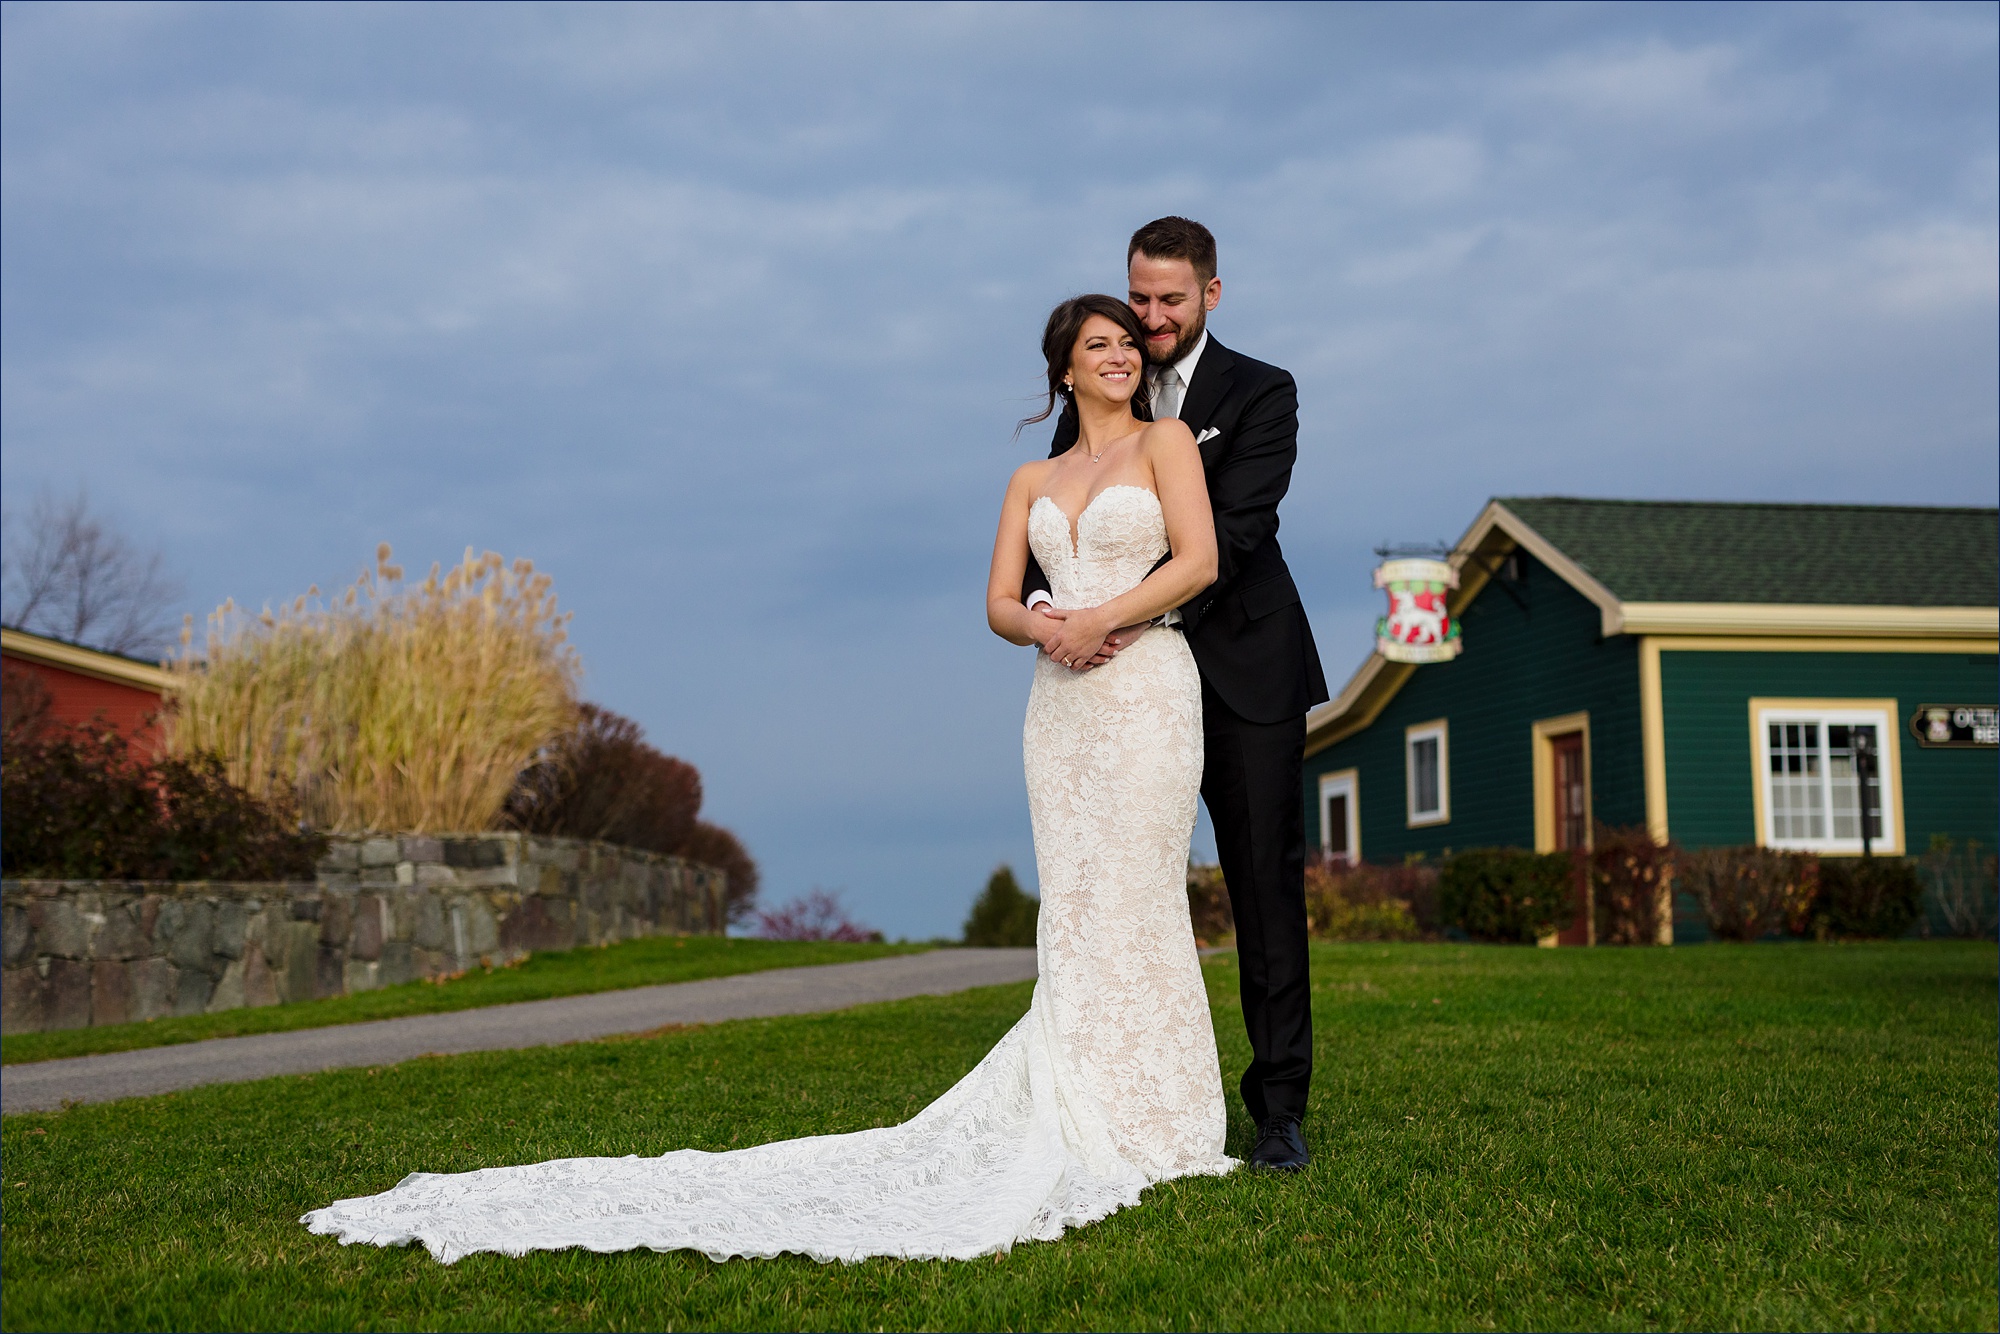 Holding onto one another tight as the storm clouds brew behind them on their Maine wedding day